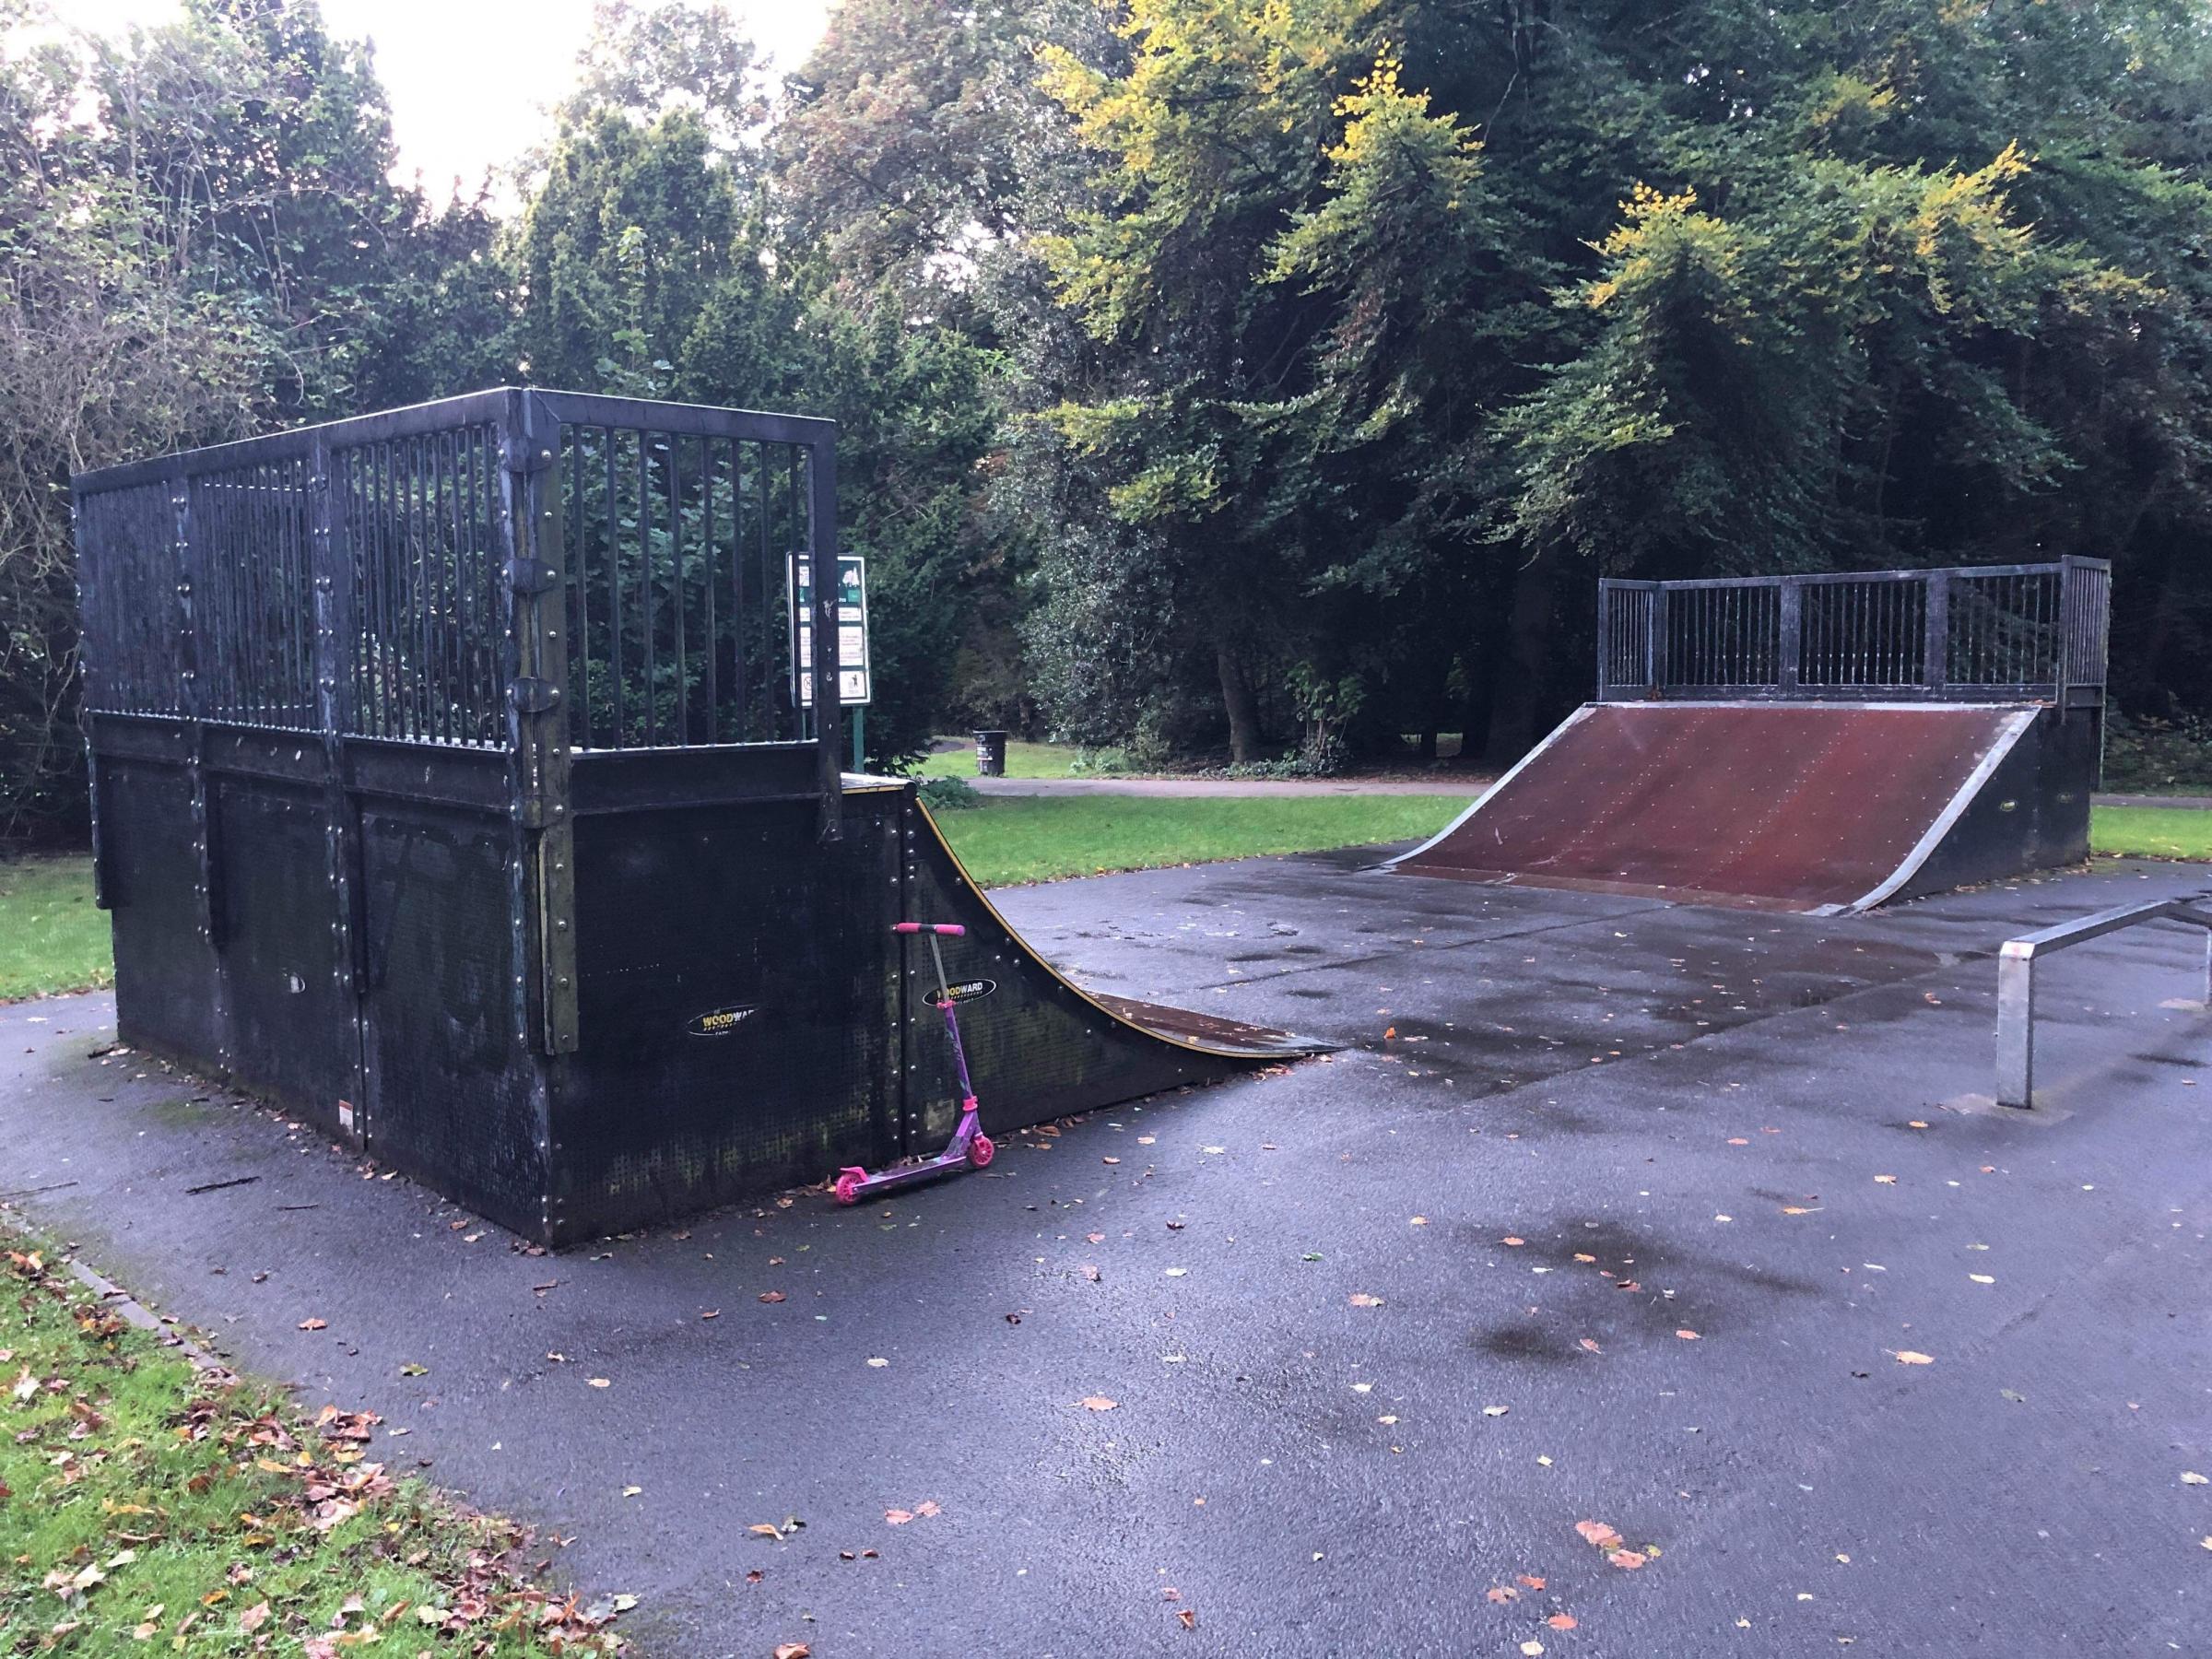 The current look at Ridgeway Grundy Park - Pictures: The Friends of Lymm Skatepark